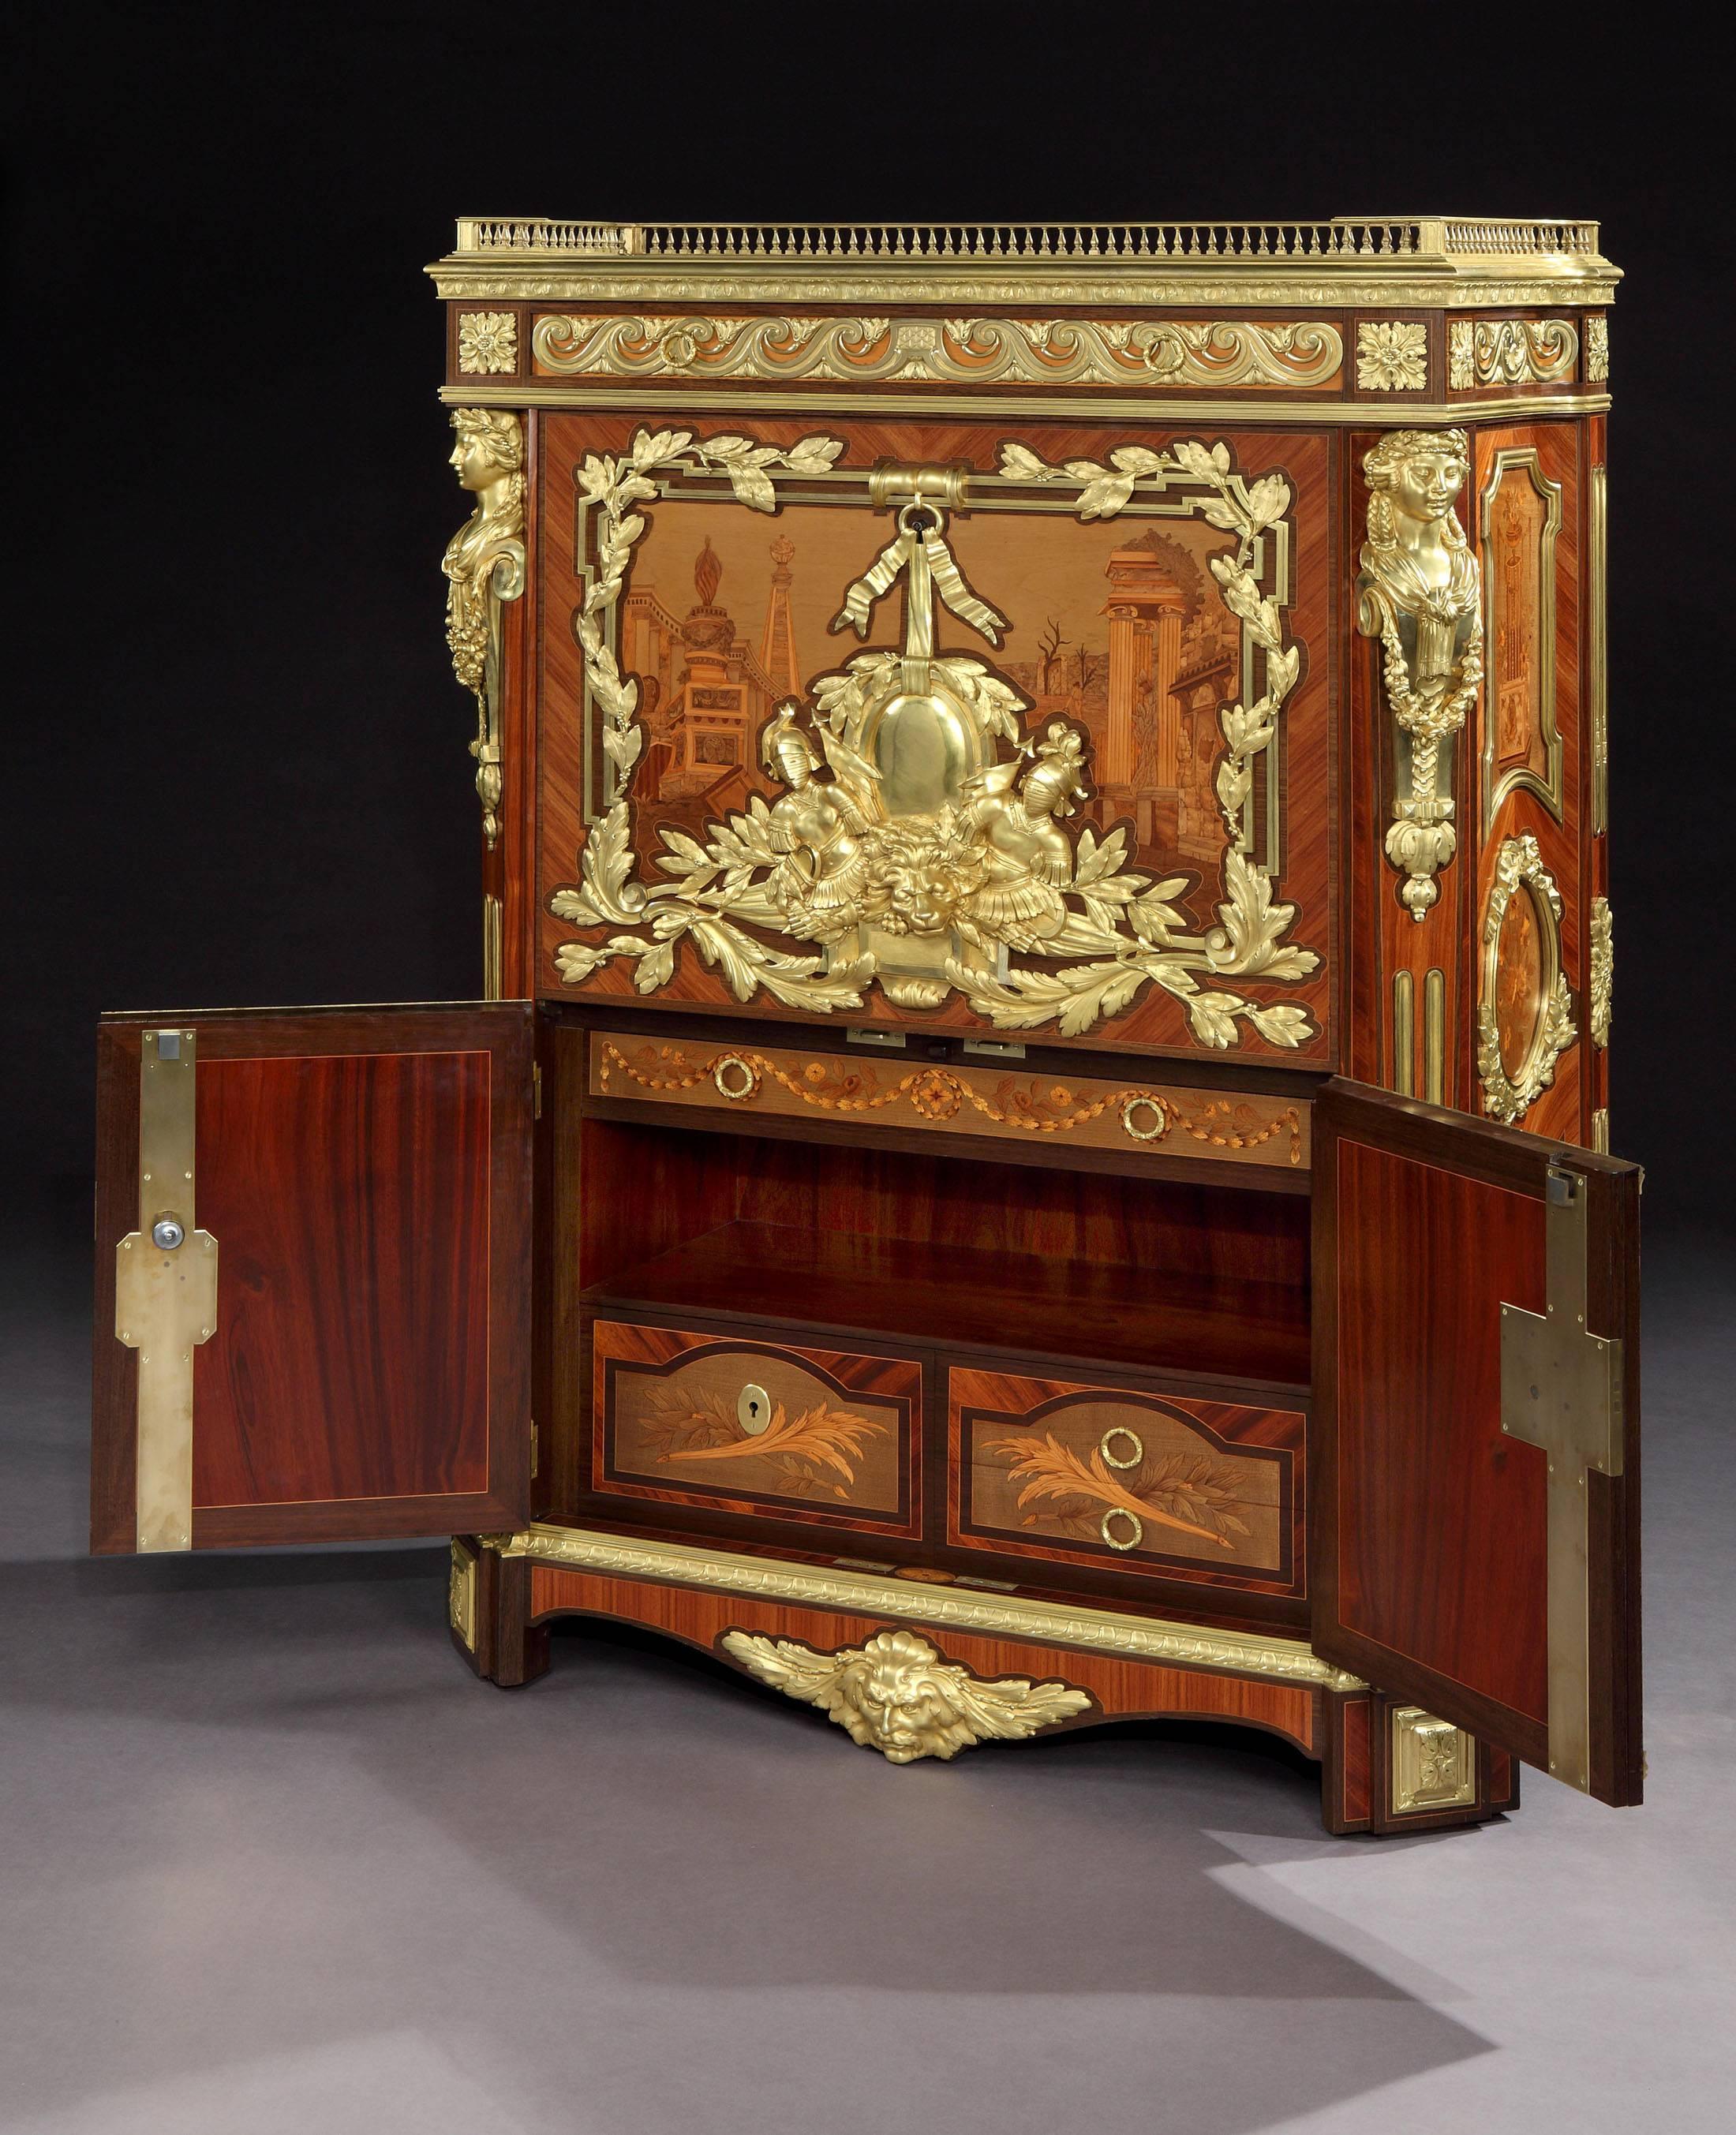 A Truly Magnificent 19th century Secre´taire a` Abattant by Maison Rogie´ of Paris After the original in the Wallace Collection, London, made in 1777 by Pierre-Antoine Foullet

Constructed in kingwood, crossbanded in tulipwood and purpleheart,